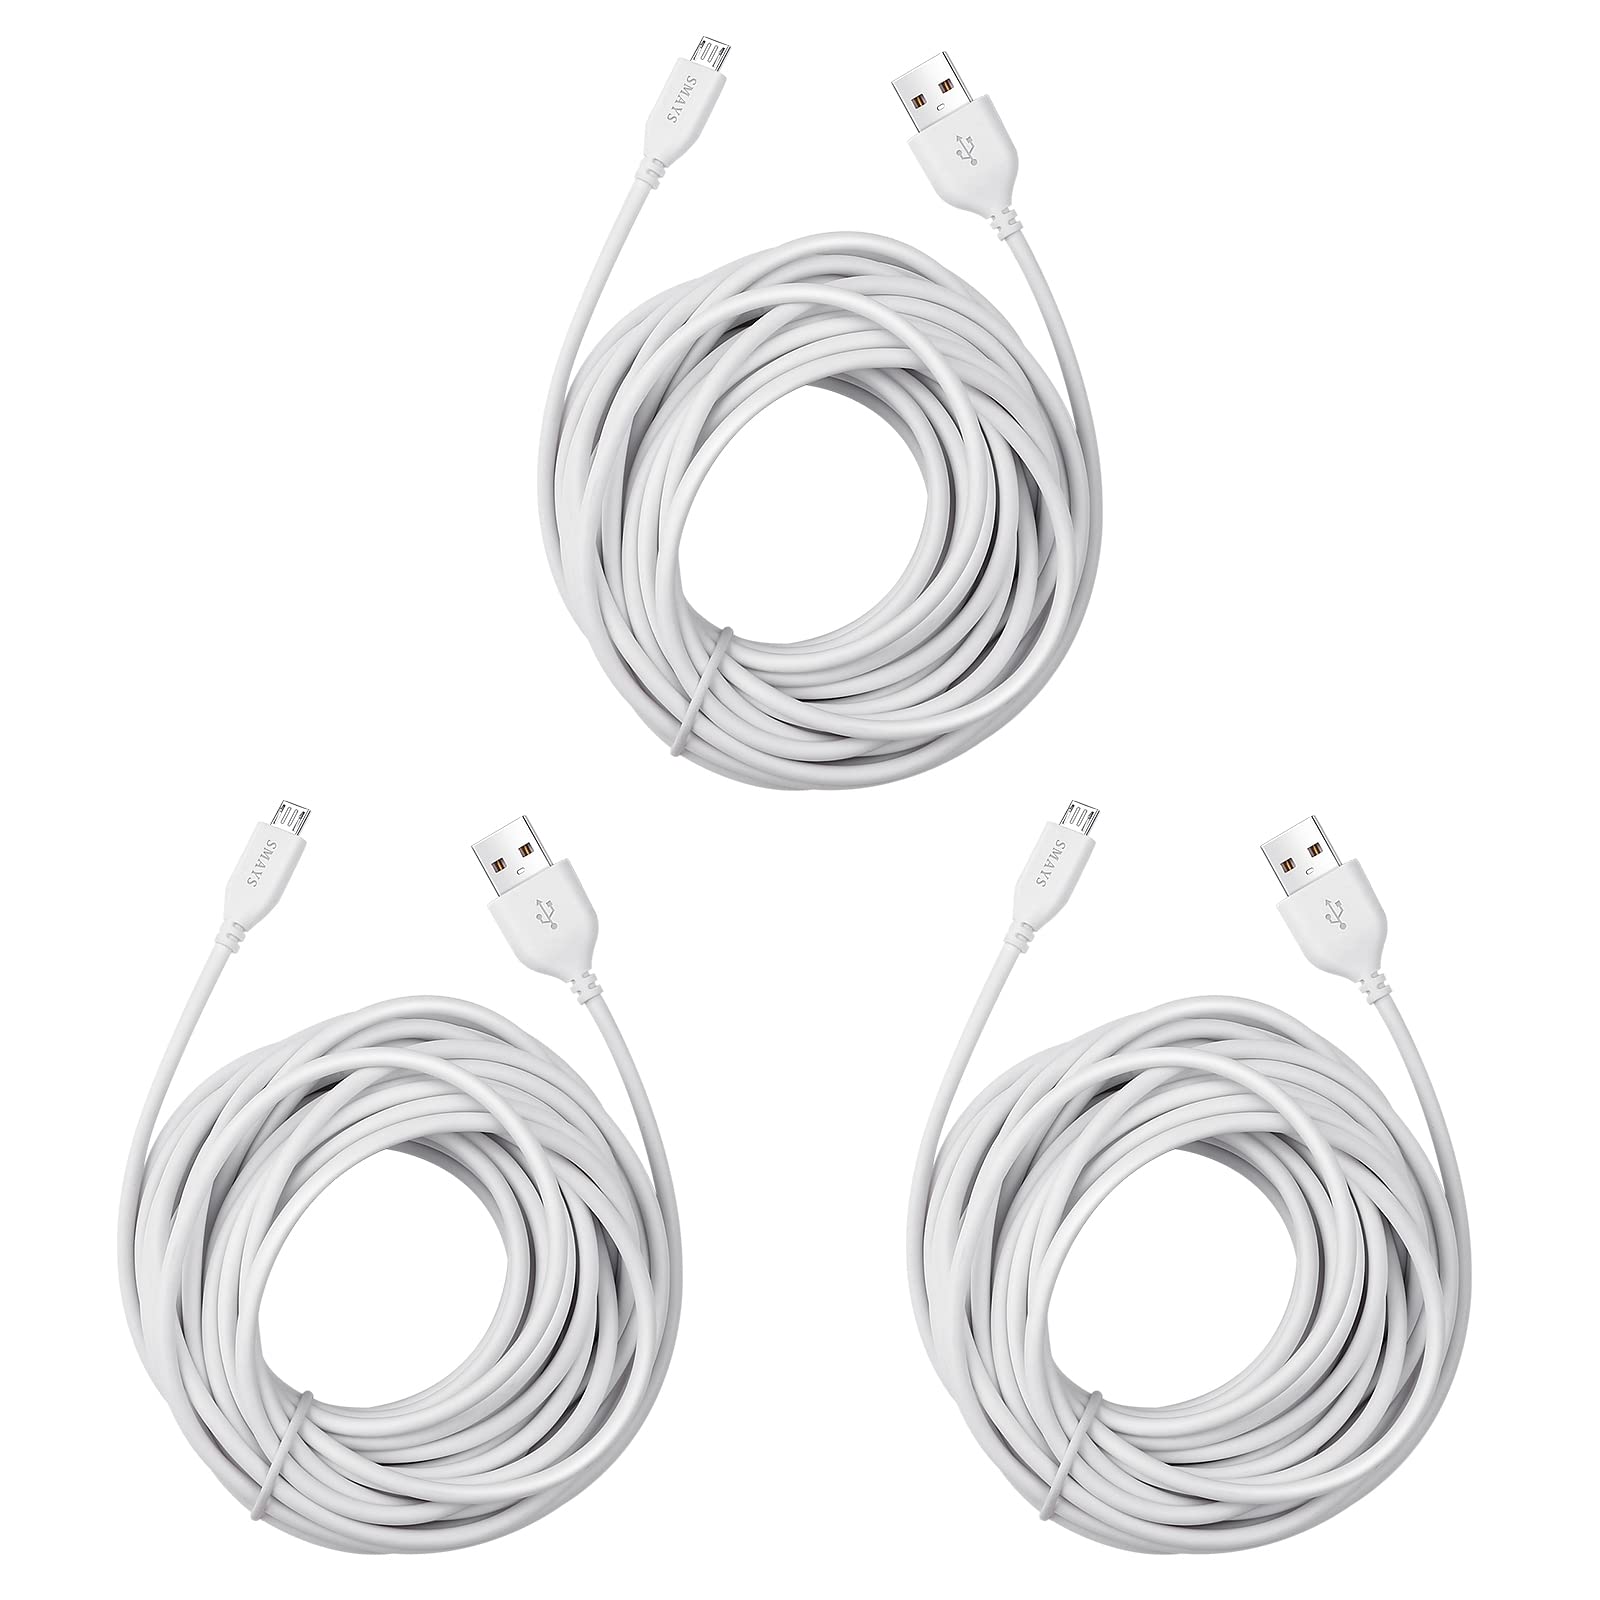 Book Cover Smays 25ft Extension Cord Replacement for Wyze Cam Pan V2 V3, Yi Home Camera, Micro USB Cable 8M Long White (3-Pack)